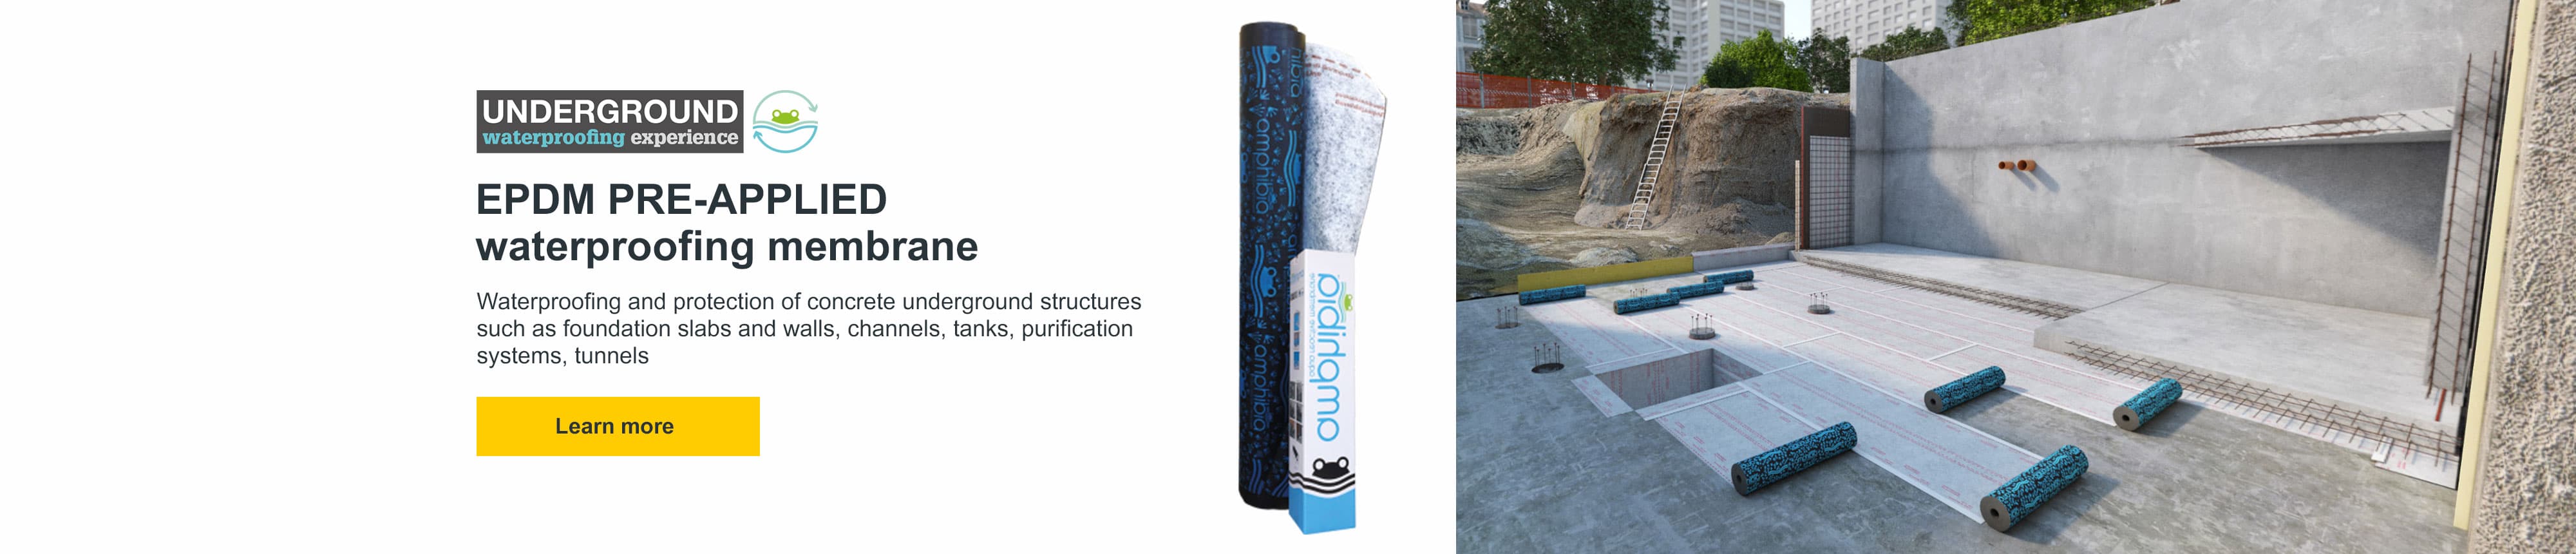 MPHIBIA 3000 GRIP is an EPDM PRE-APPLIED waterproof membrane, reactive to contact with water, SELF-REPAIRING, SELF-SEALING and SELF-FASTENING to the concrete.